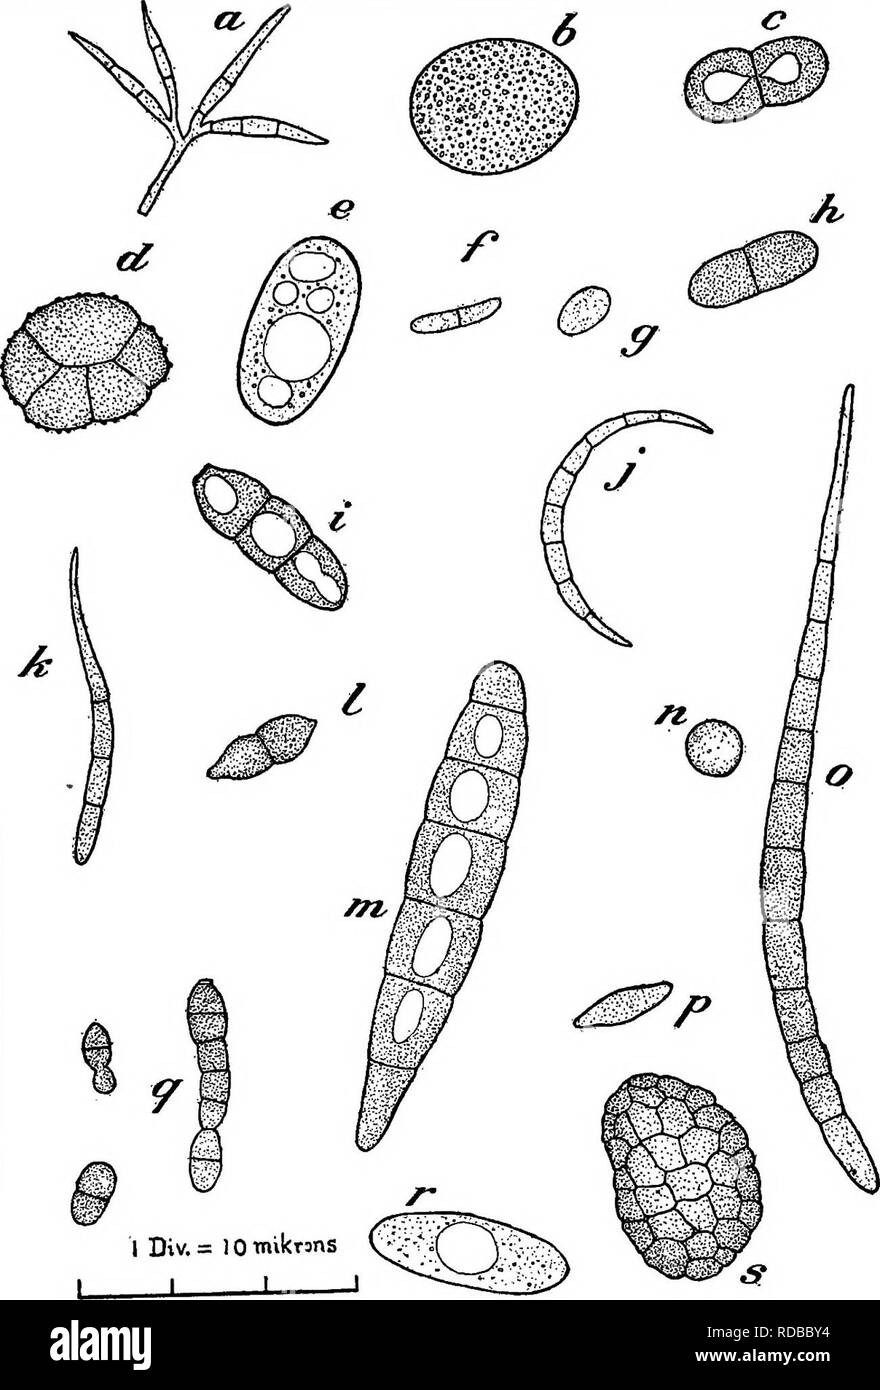 . Chestnut blight. Chestnut blight; Chestnut. Sept. SI, 1914 Birds and Chestnut Blight 419. Fig . -Types of spores other than those of Endathia parasitica obtamed by the microscopic exammatoa o L c^uged^edhnent from the test of bird No. .3. a brown creeper. Brown-spored forms appear to ^!do^&quot;e ., Hyaline; b. hyaline; ., dark brovm; d. nearly black; .. hyahne; /. hght brown; ,. loky;7^l&quot;mokyr.-. dark smoky; /, hyaline; k. pale smoky; /, dark smoky; «. smoky; „. hyaUne; o. brown; P. hyaline; «, dark smoky; r. hyaline; s. very dark, ahnost black.. Please note that these images are extra Stock Photo